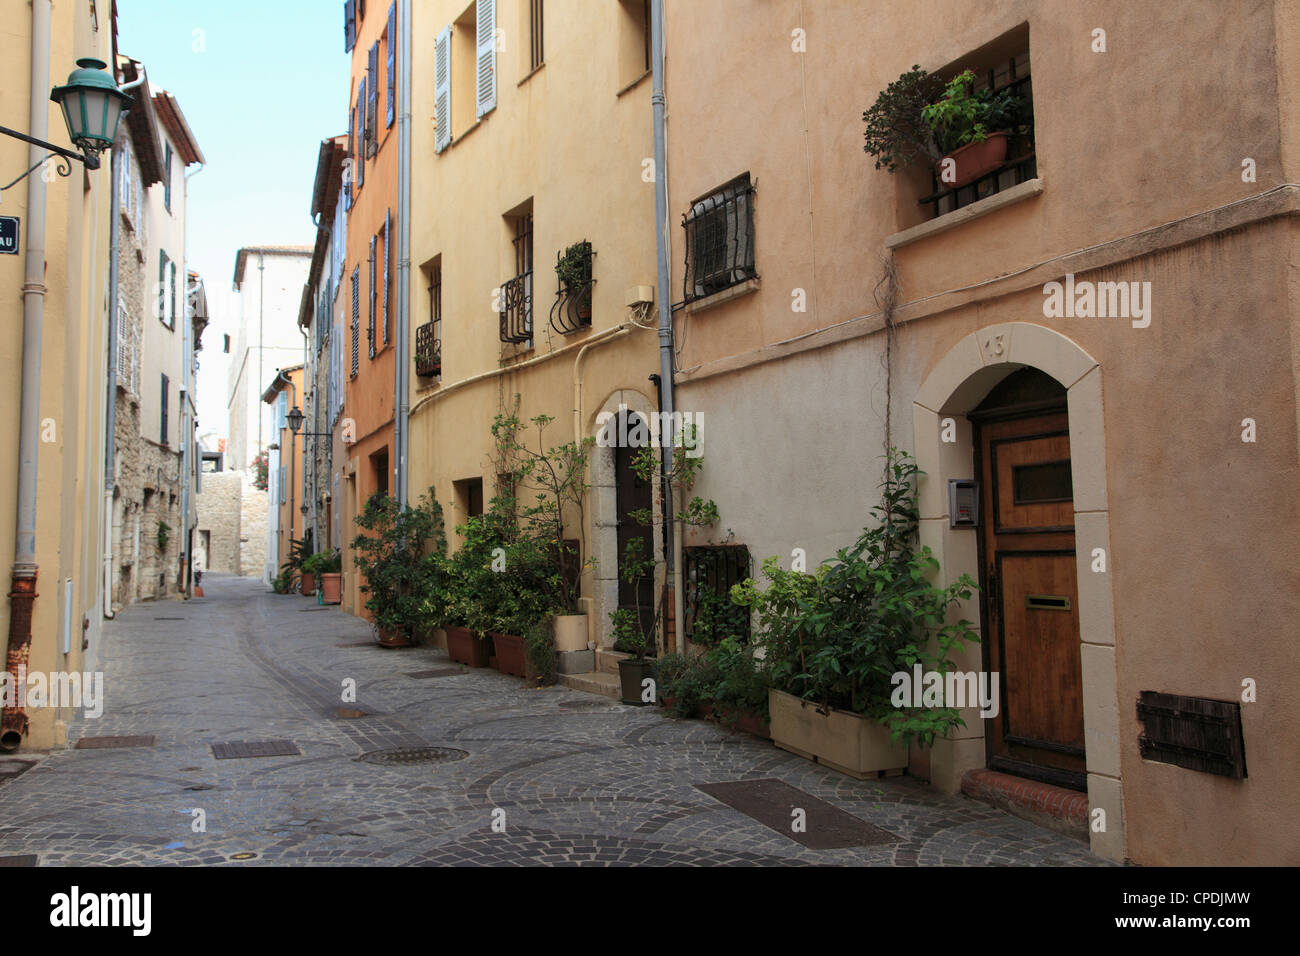 Old Town, Vieil Antibes, Antibes, Cote d'Azur, French Riviera, Provence, France, Europe Stock Photo